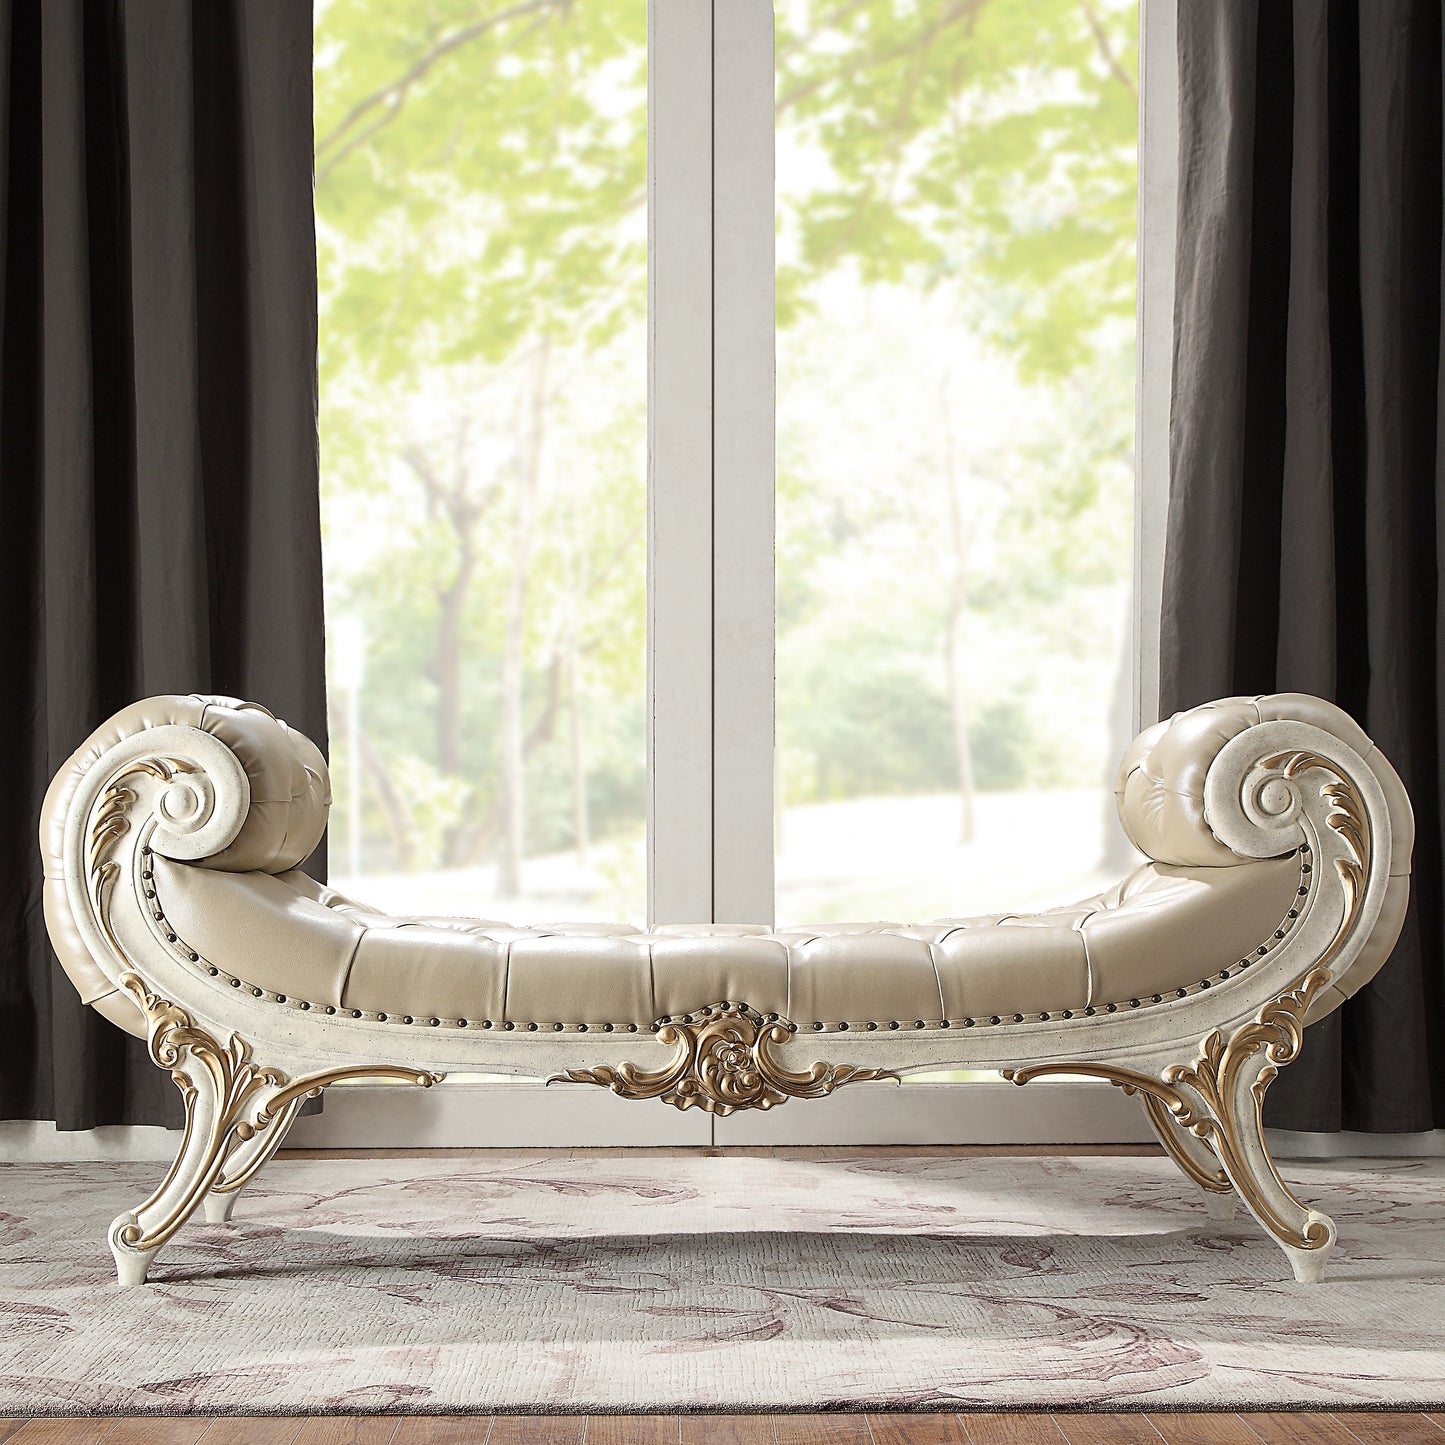 Leather Bed Bench in Plantation Cove White Finish European Victorian